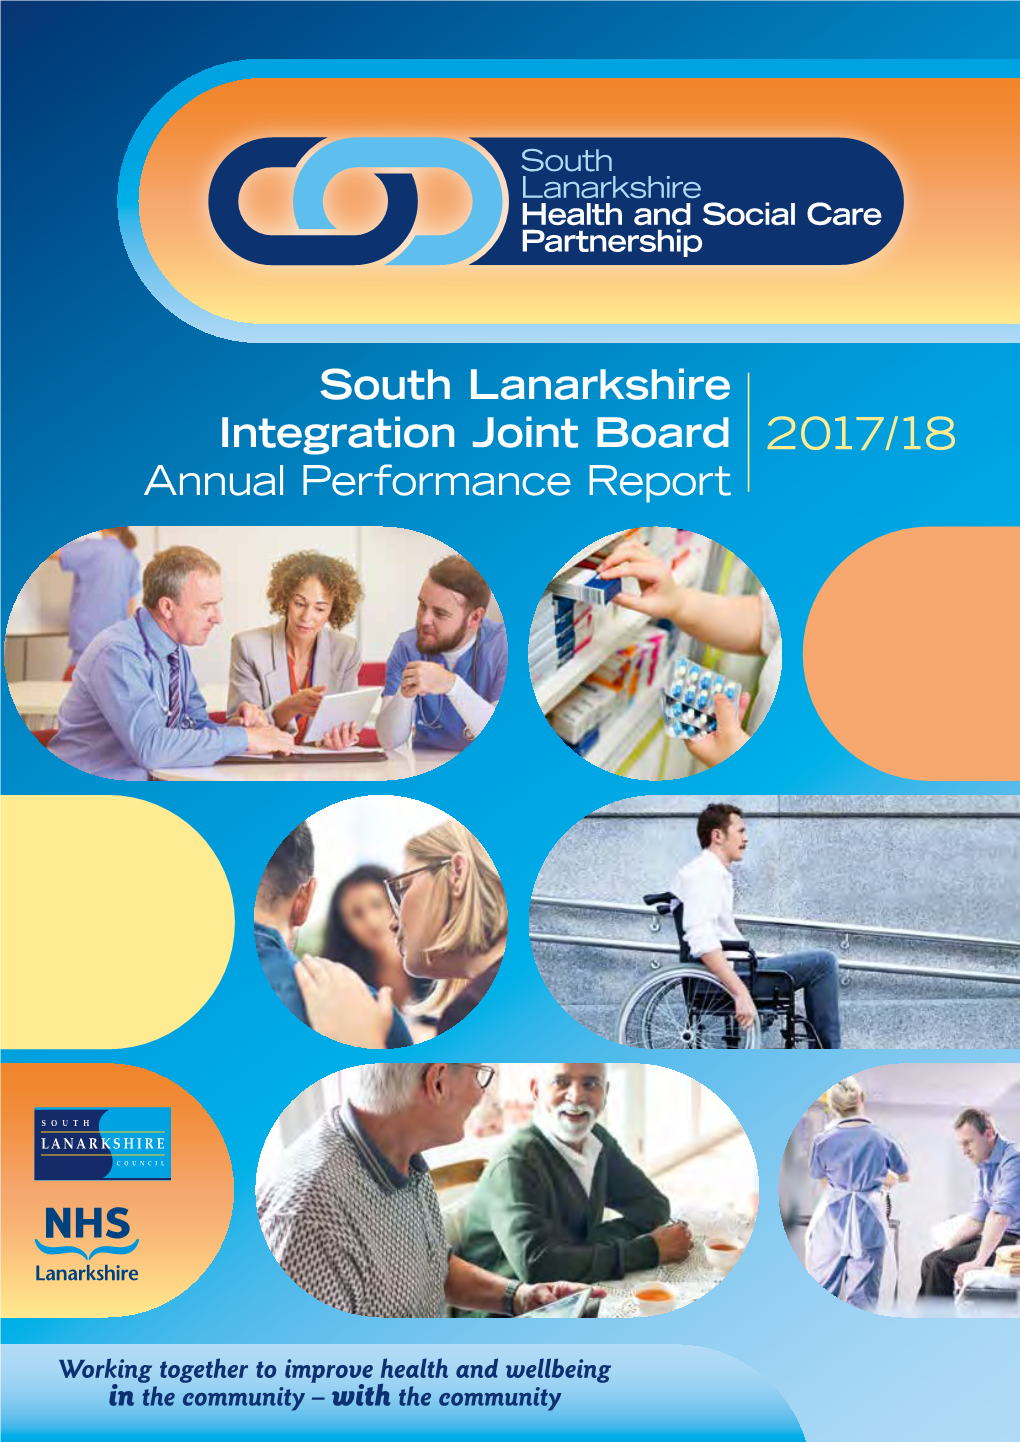 South Lanarkshire Integration Joint Board Annual Performance Report 2 017/18